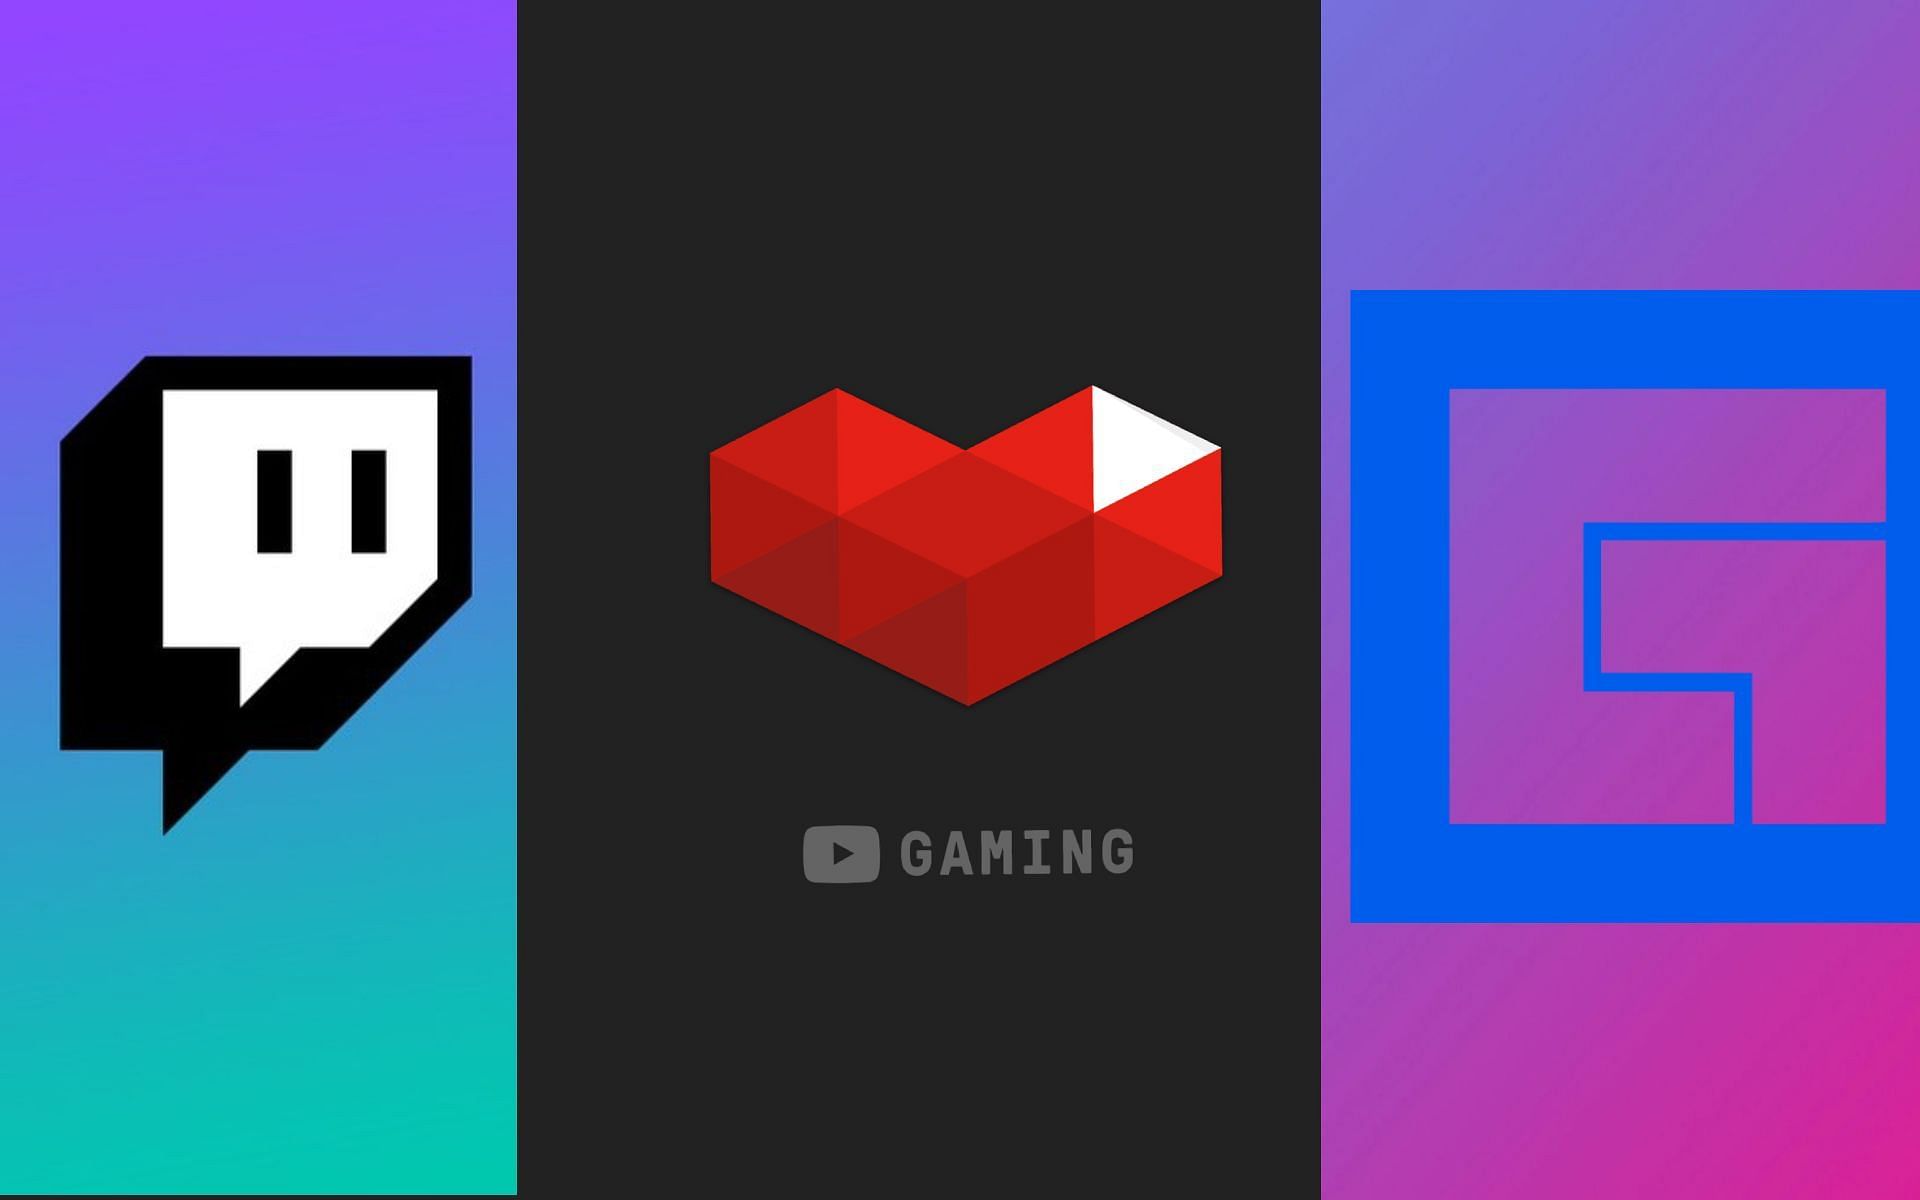 Who were the biggest streamers on Twitch, YouTube, and Facebook Gaming in 2022?